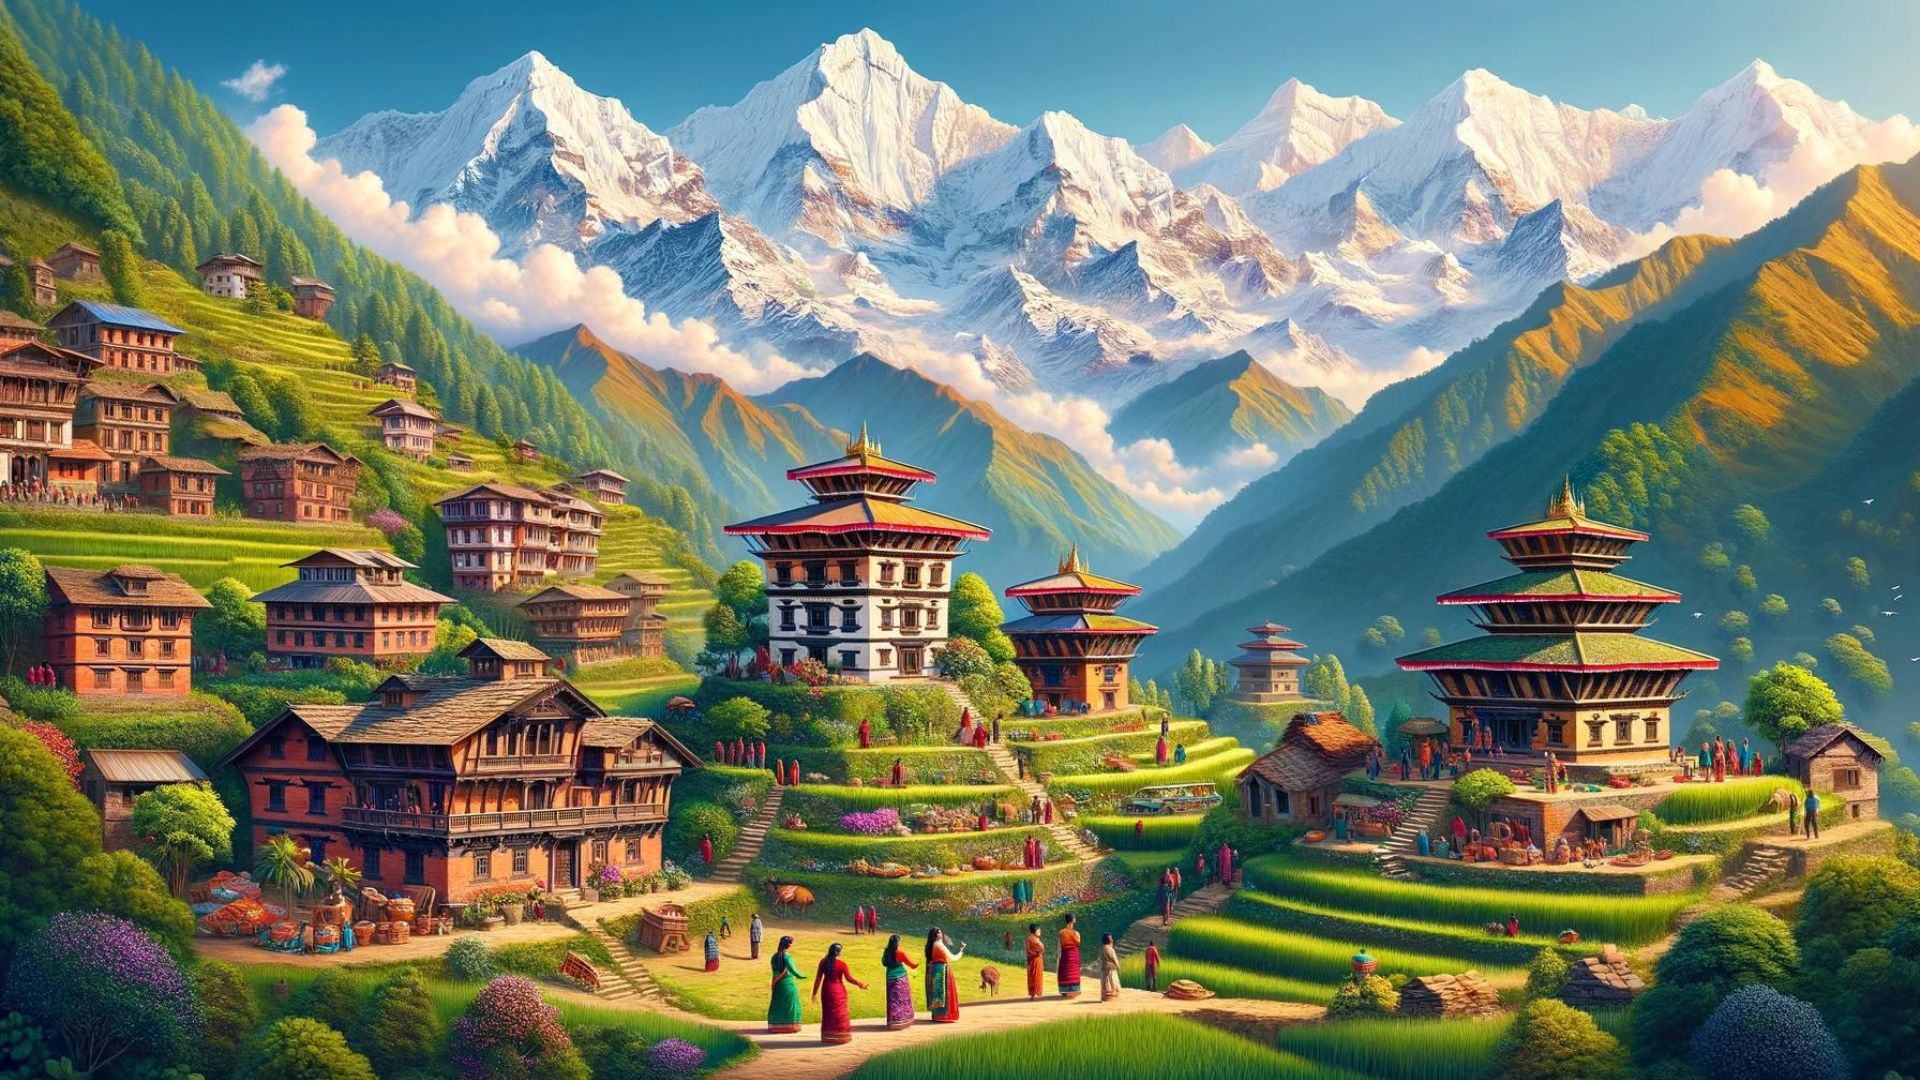 How much do you know about Nepal